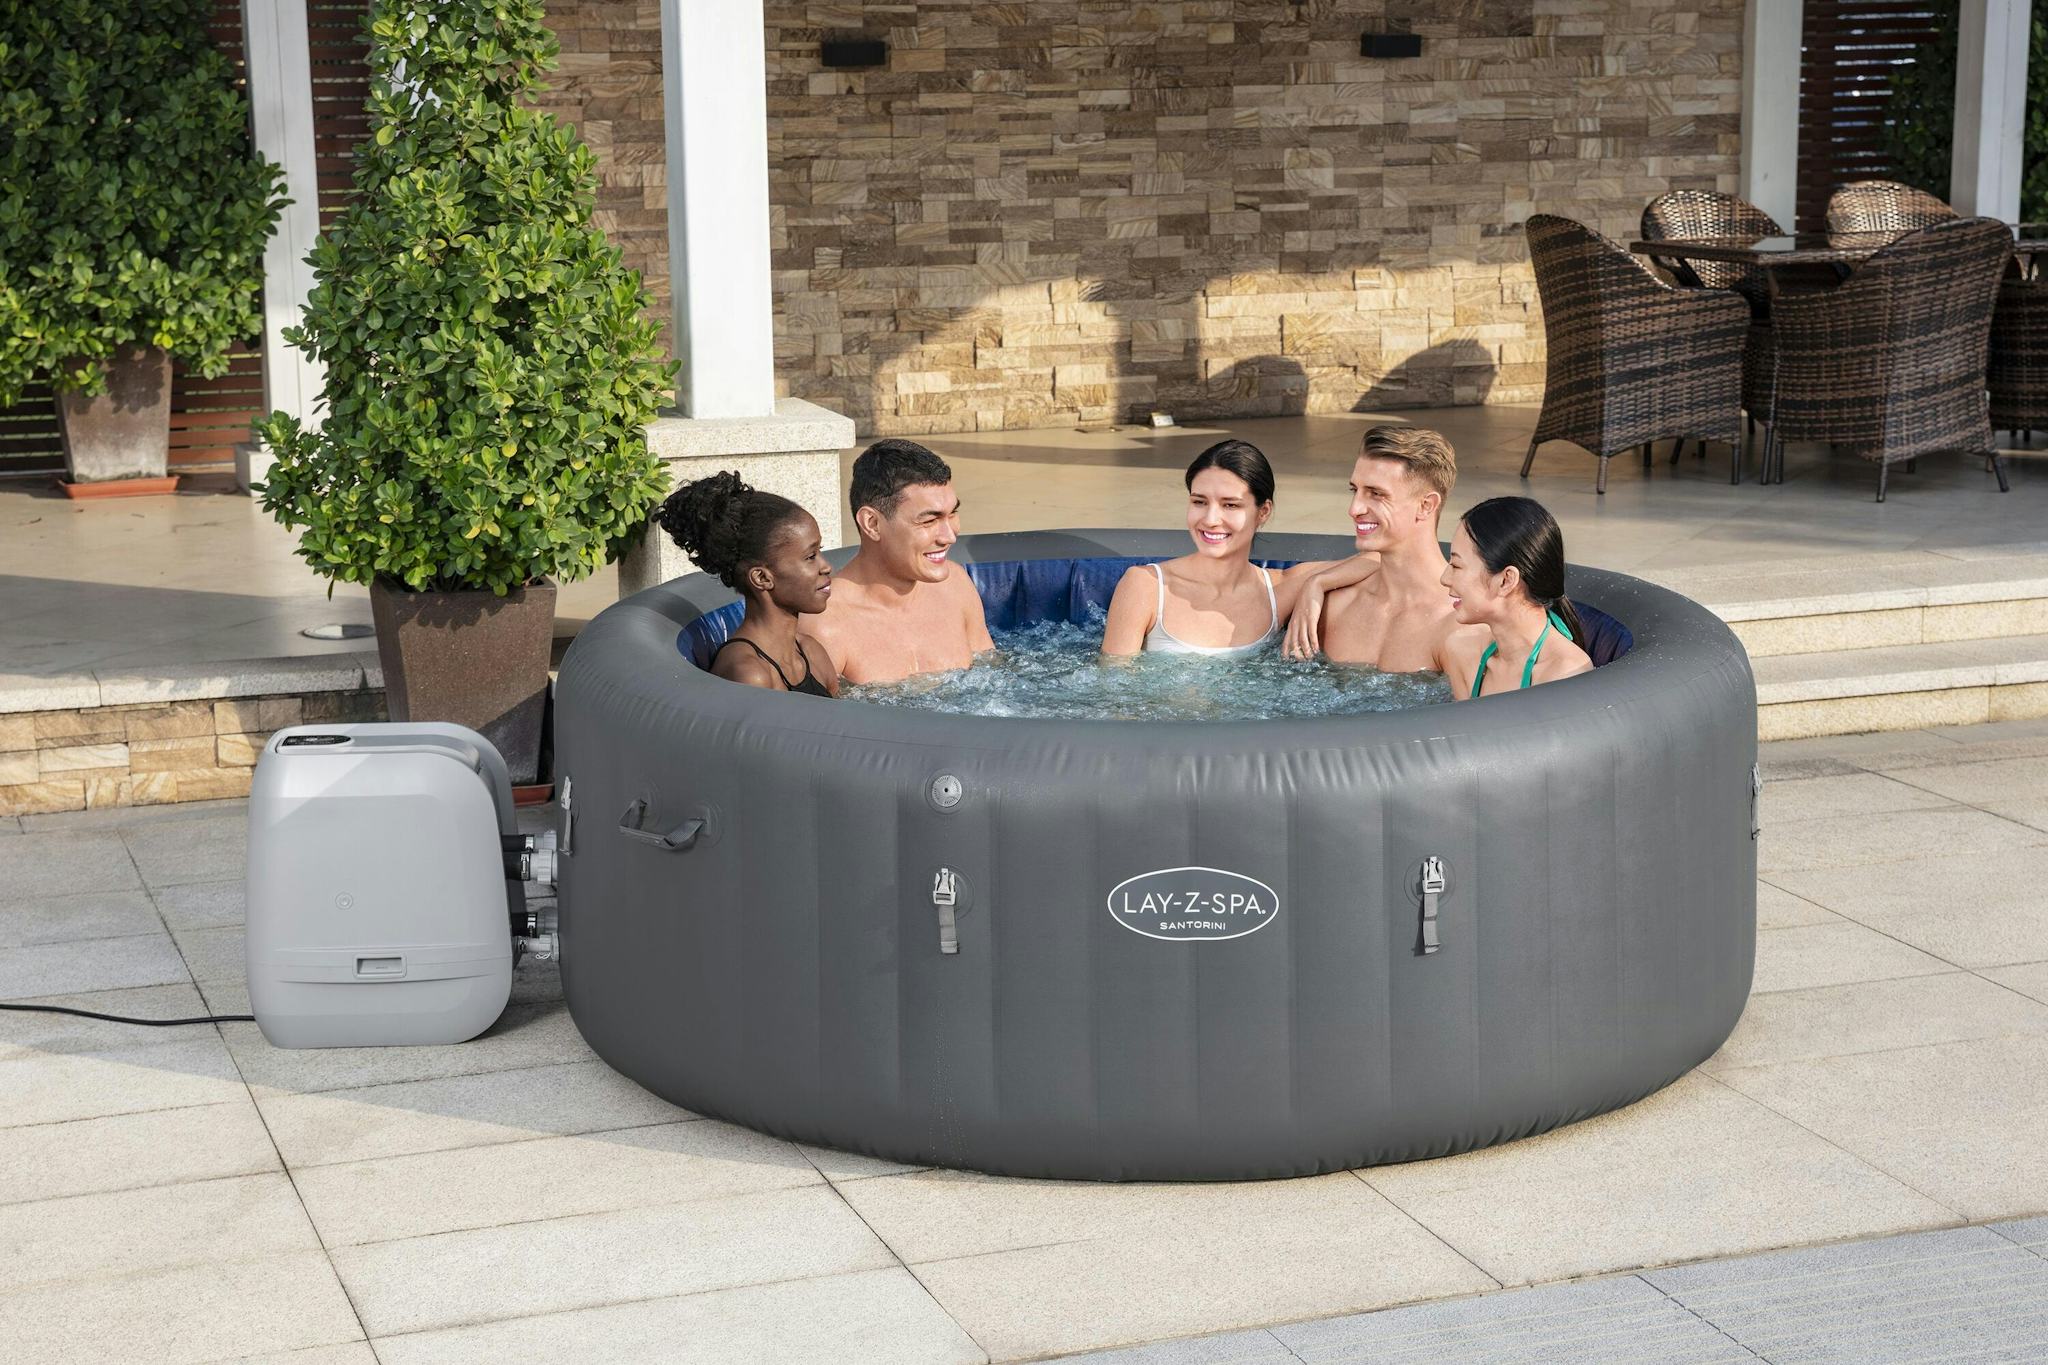 Spas Gonflables Spa gonflable rond Lay-Z-Spa Santorini Hydrojet pro™ 5 - 7 personnes Bestway 5